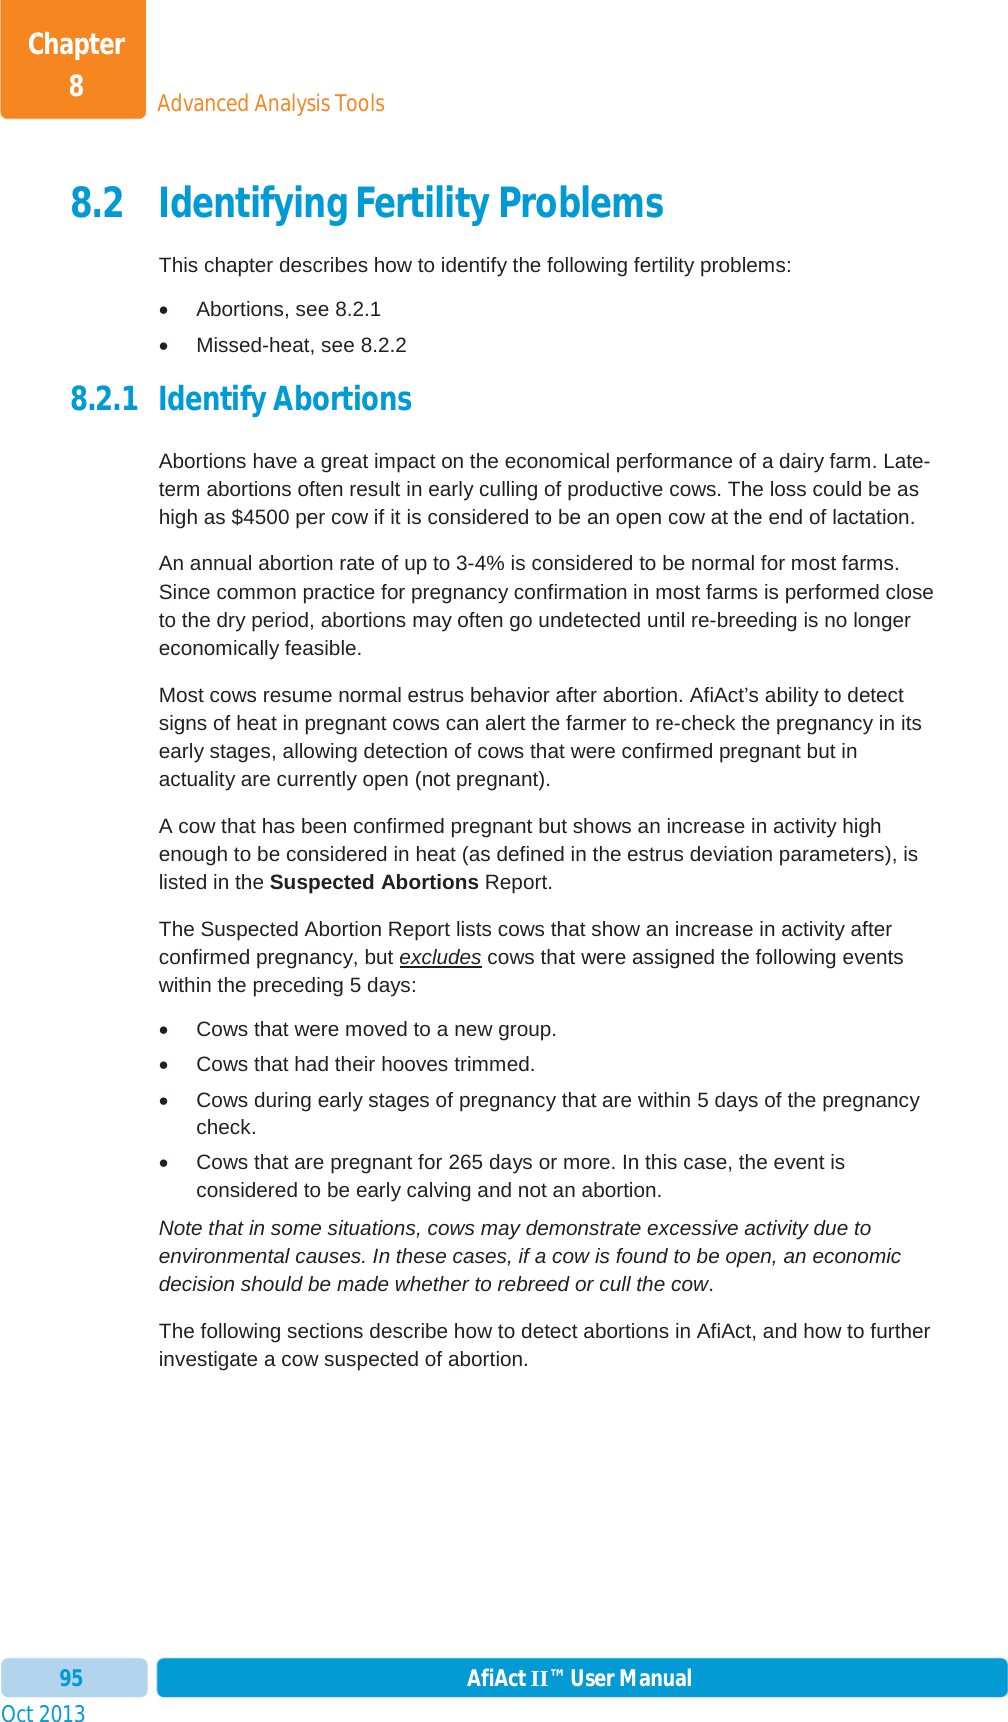 Oct 2013 AfiAct II™ User Manual95Advanced Analysis ToolsChapter 88.2 Identifying Fertility Problems This chapter describes how to identify the following fertility problems: x Abortions, see  8.2.1 x Missed-heat, see  8.2.2 8.2.1 Identify Abortions Abortions have a great impact on the economical performance of a dairy farm. Late-term abortions often result in early culling of productive cows. The loss could be as high as $4500 per cow if it is considered to be an open cow at the end of lactation.  An annual abortion rate of up to 3-4% is considered to be normal for most farms. Since common practice for pregnancy confirmation in most farms is performed close to the dry period, abortions may often go undetected until re-breeding is no longer economically feasible.  Most cows resume normal estrus behavior after abortion. AfiAct’s ability to detect signs of heat in pregnant cows can alert the farmer to re-check the pregnancy in its early stages, allowing detection of cows that were confirmed pregnant but in actuality are currently open (not pregnant). A cow that has been confirmed pregnant but shows an increase in activity high enough to be considered in heat (as defined in the estrus deviation parameters), is listed in the Suspected Abortions Report. The Suspected Abortion Report lists cows that show an increase in activity after confirmed pregnancy, but excludes cows that were assigned the following events within the preceding 5 days: x  Cows that were moved to a new group. x  Cows that had their hooves trimmed. x  Cows during early stages of pregnancy that are within 5 days of the pregnancy check. x  Cows that are pregnant for 265 days or more. In this case, the event is considered to be early calving and not an abortion. Note that in some situations, cows may demonstrate excessive activity due to environmental causes. In these cases, if a cow is found to be open, an economic decision should be made whether to rebreed or cull the cow.The following sections describe how to detect abortions in AfiAct, and how to further investigate a cow suspected of abortion. 